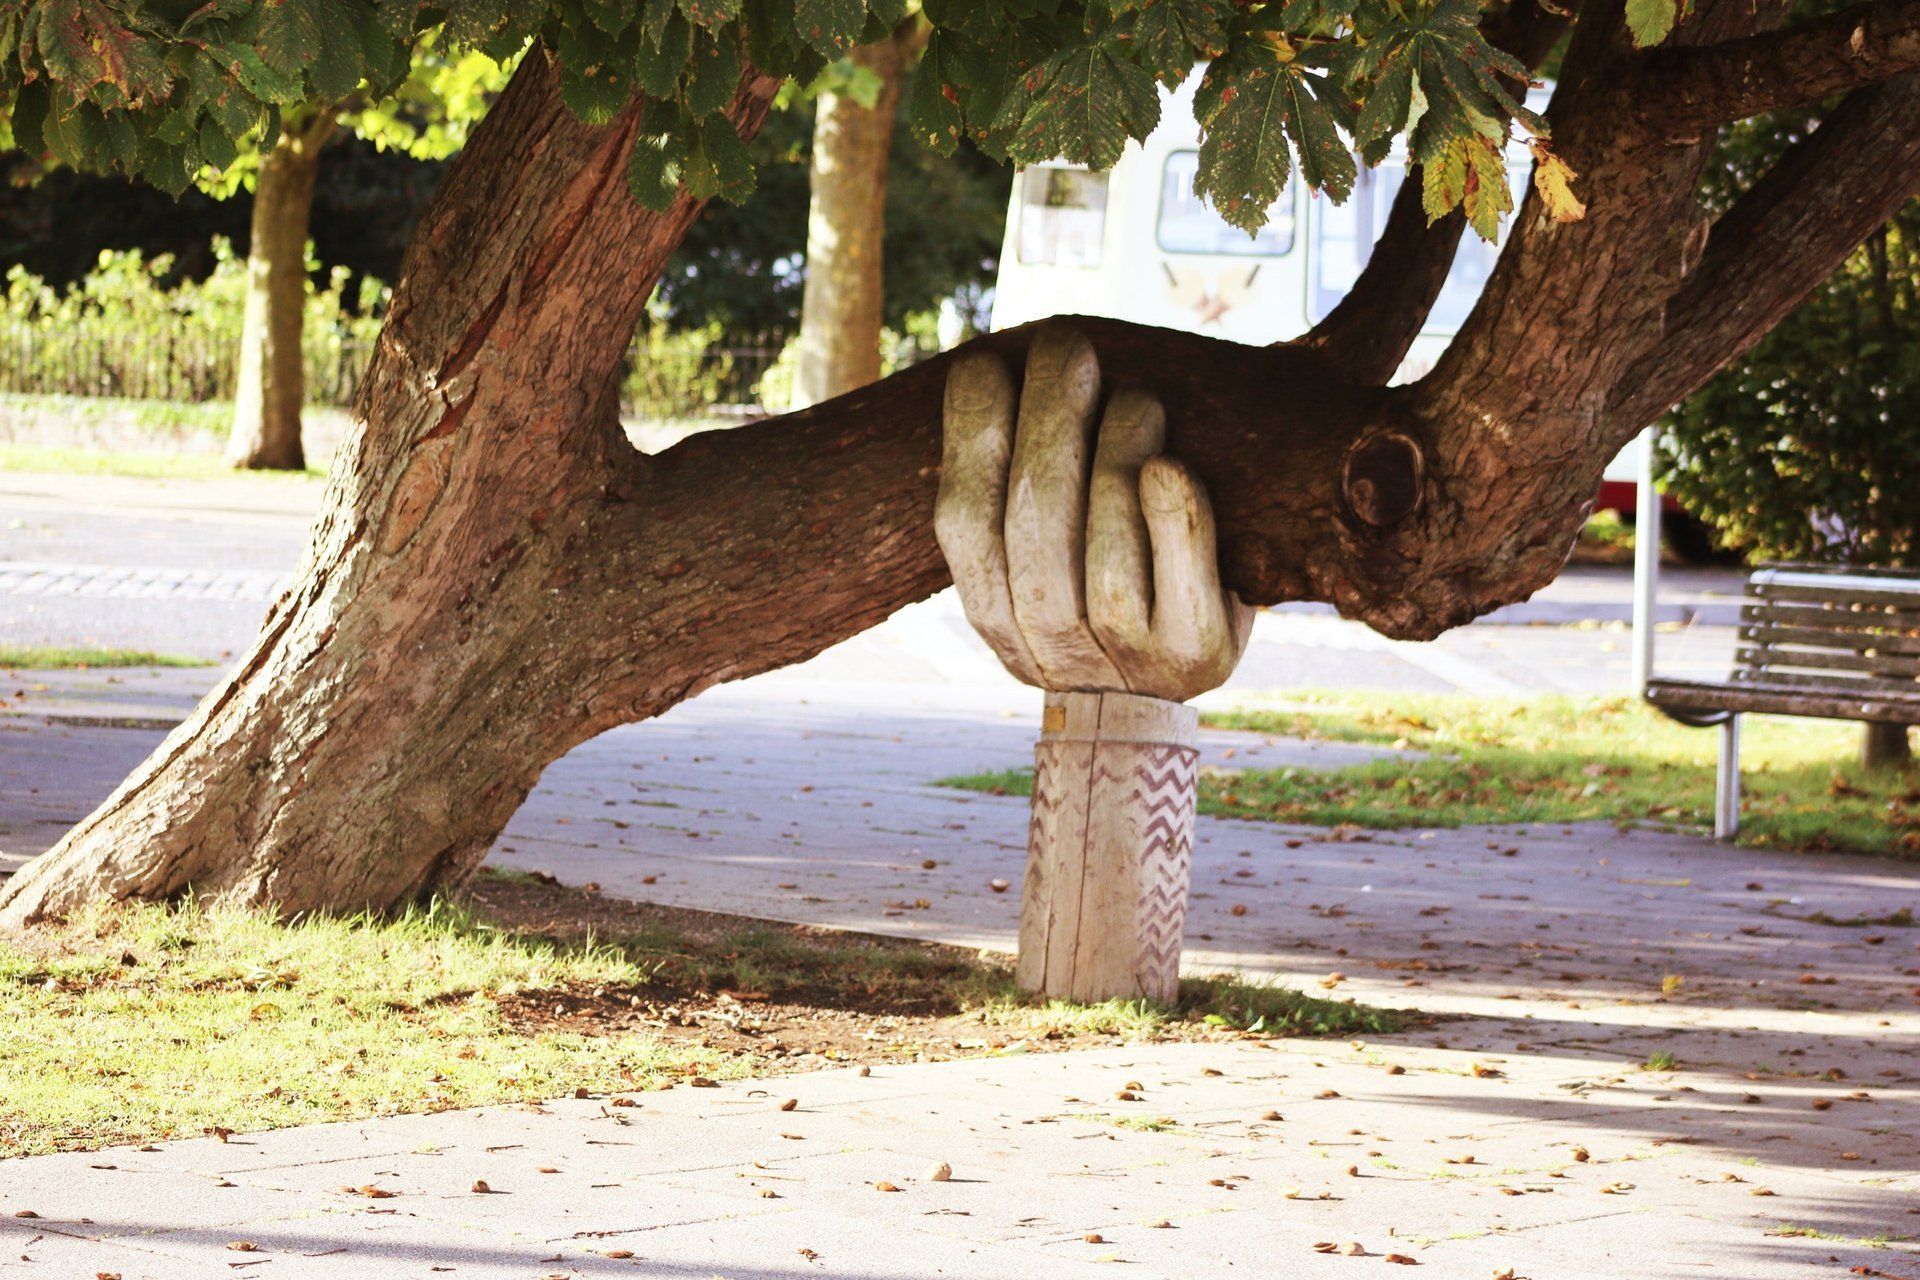 giant carved hand anchors a tree limb